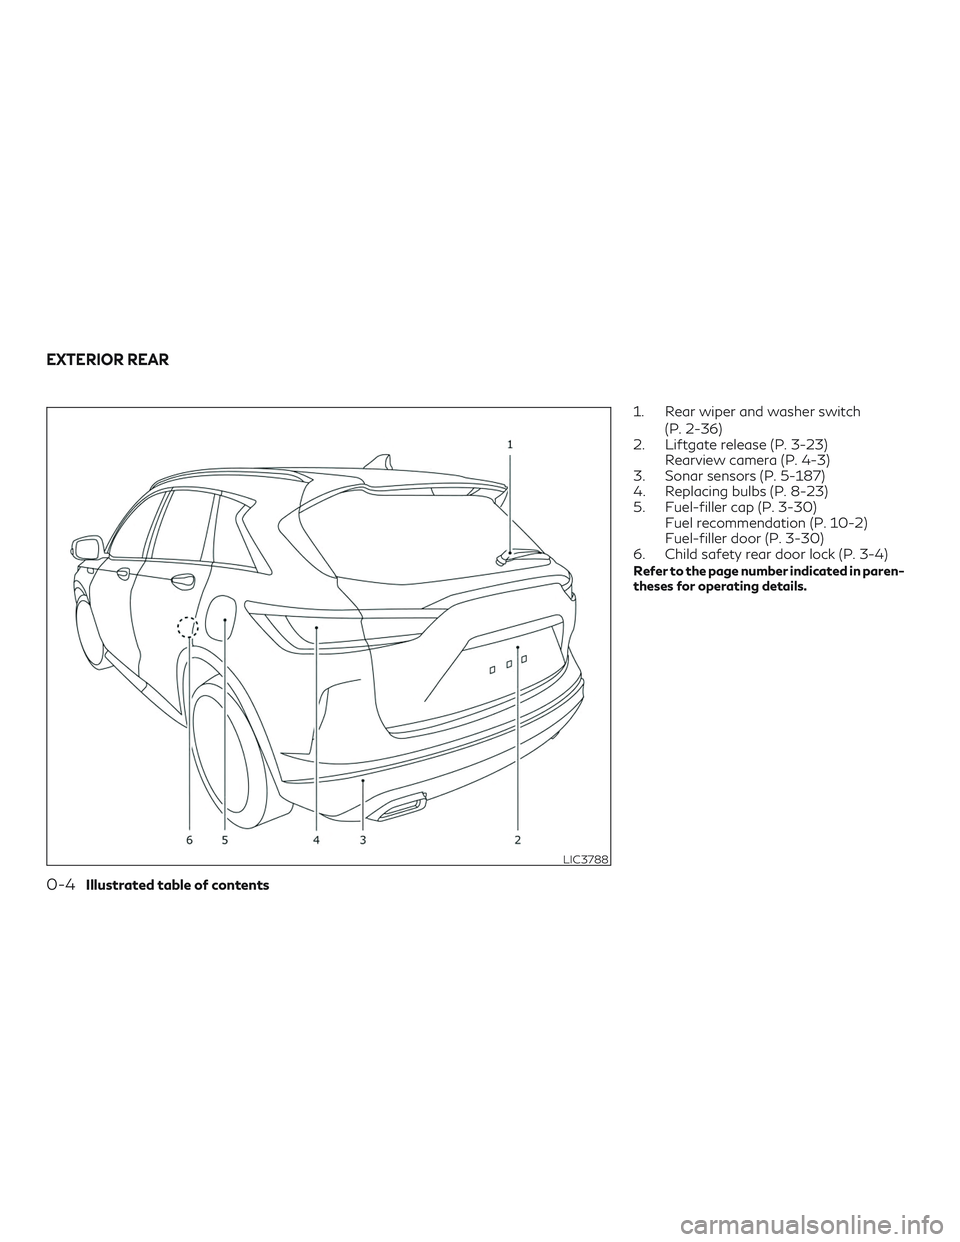 INFINITI QX50 2020  Owners Manual 1. Rear wiper and washer switch(P. 2-36)
2. Liftgate release (P. 3-23) Rearview camera (P. 4-3)
3. Sonar sensors (P. 5-187)
4. Replacing bulbs (P. 8-23)
5. Fuel-filler cap (P. 3-30) Fuel recommendatio